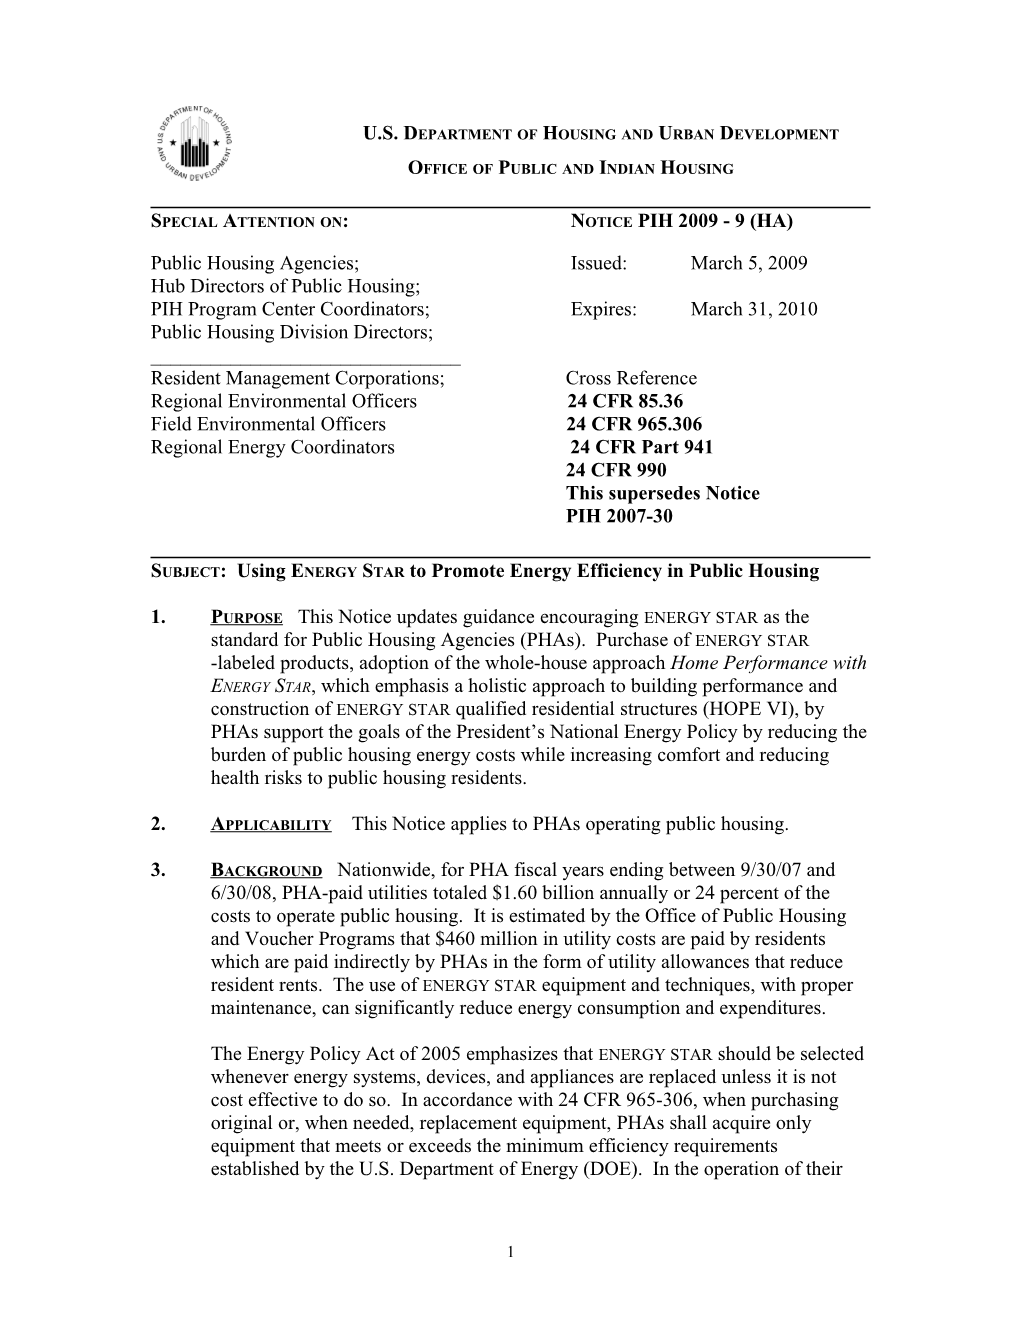 Draft of PIH Notice for Revising Or Updating Energy Audits